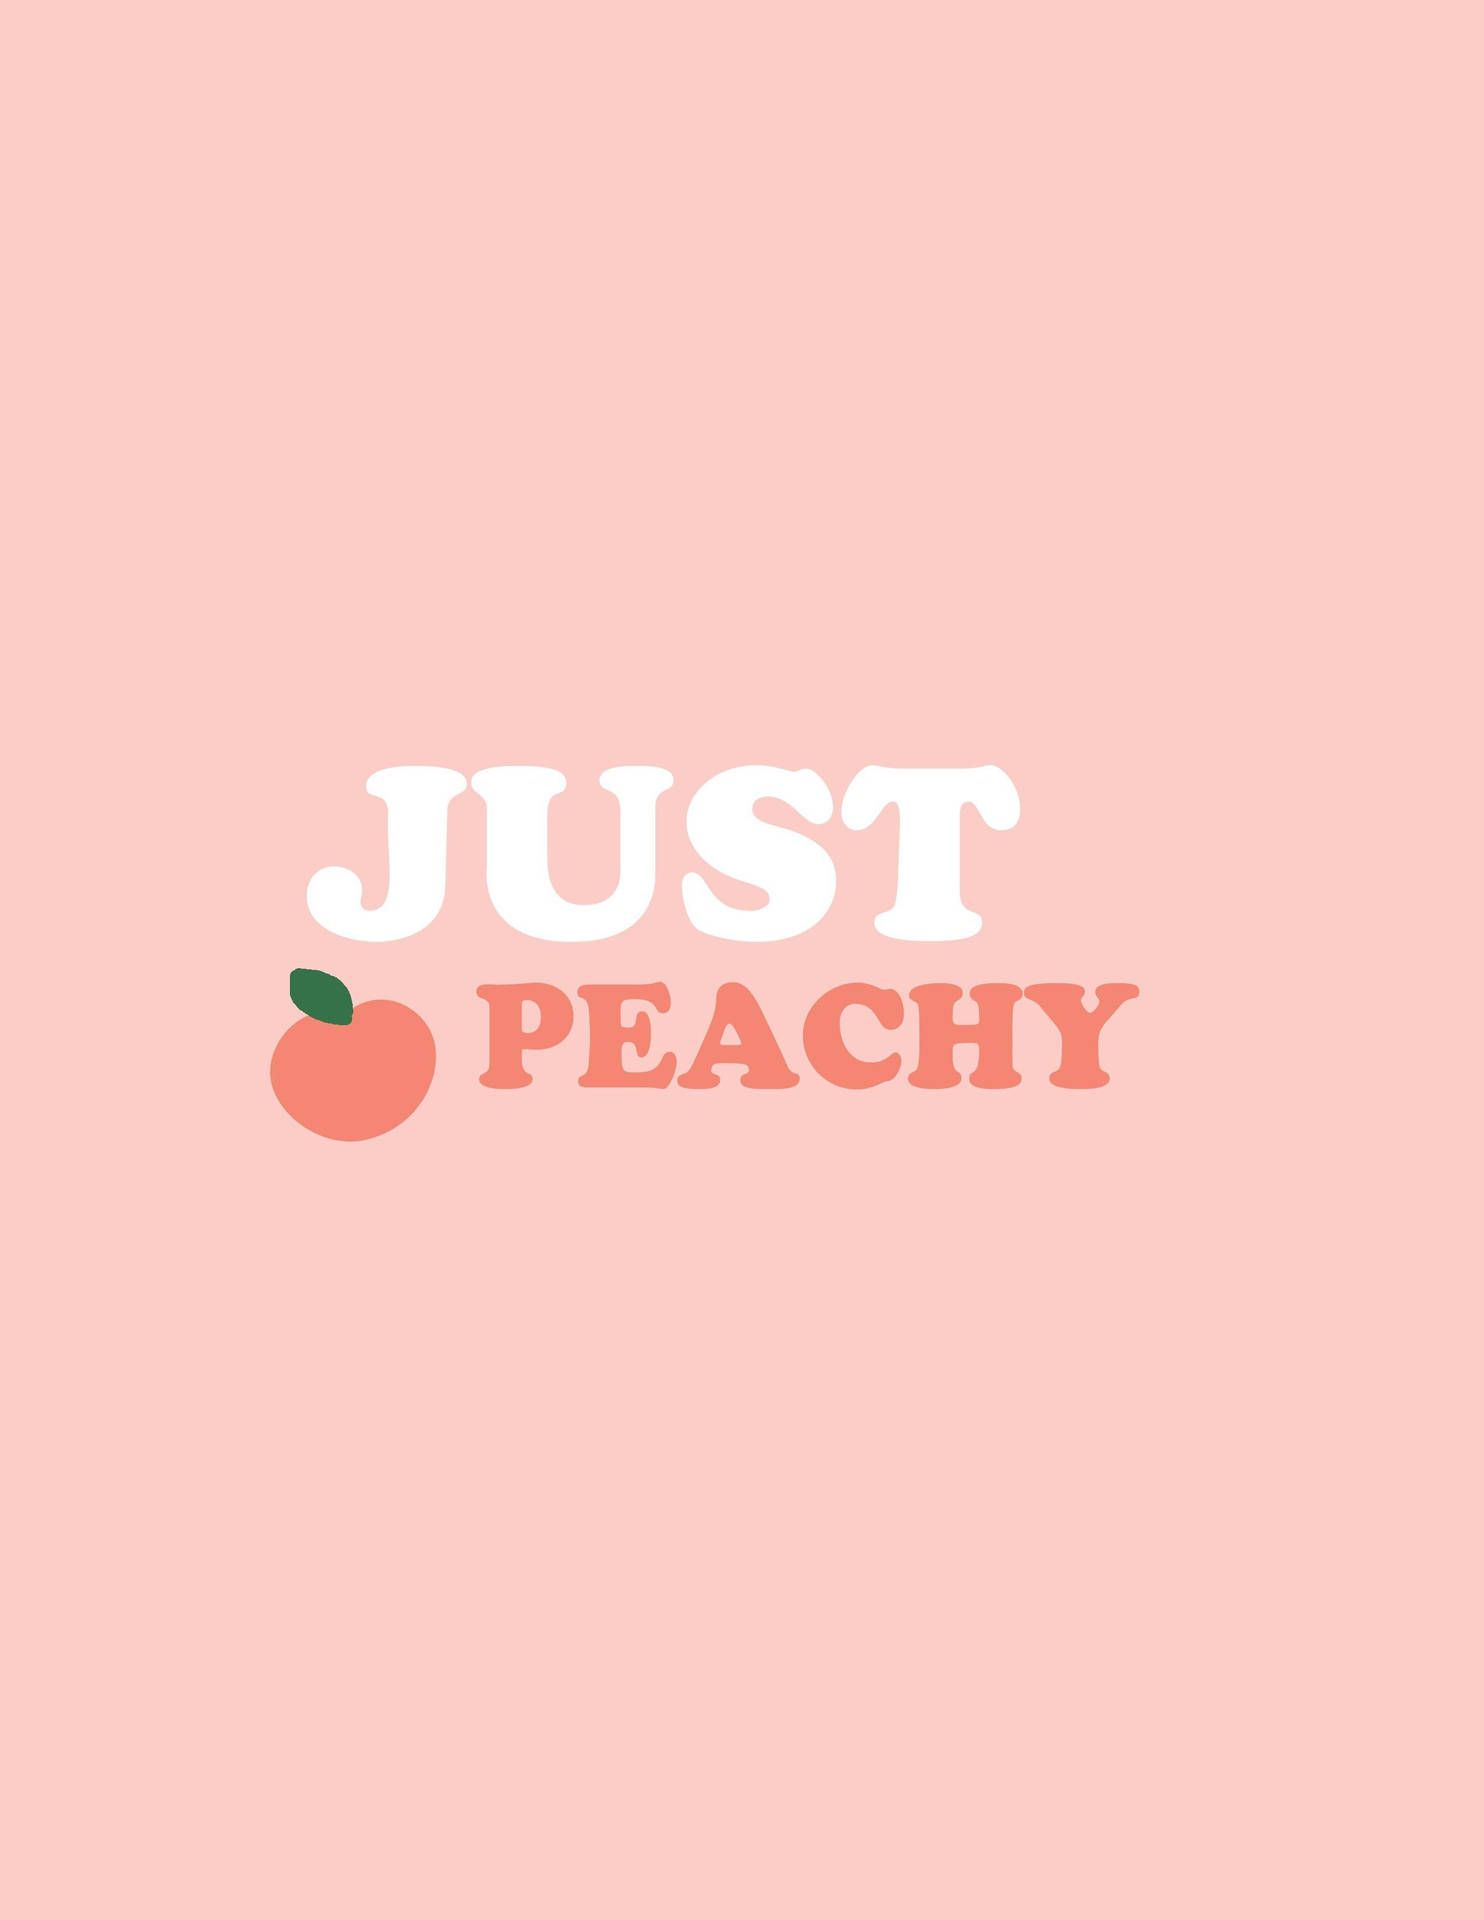 Free Aesthetic Peach Pink Wallpaper Downloads, Aesthetic Peach Pink Wallpaper for FREE